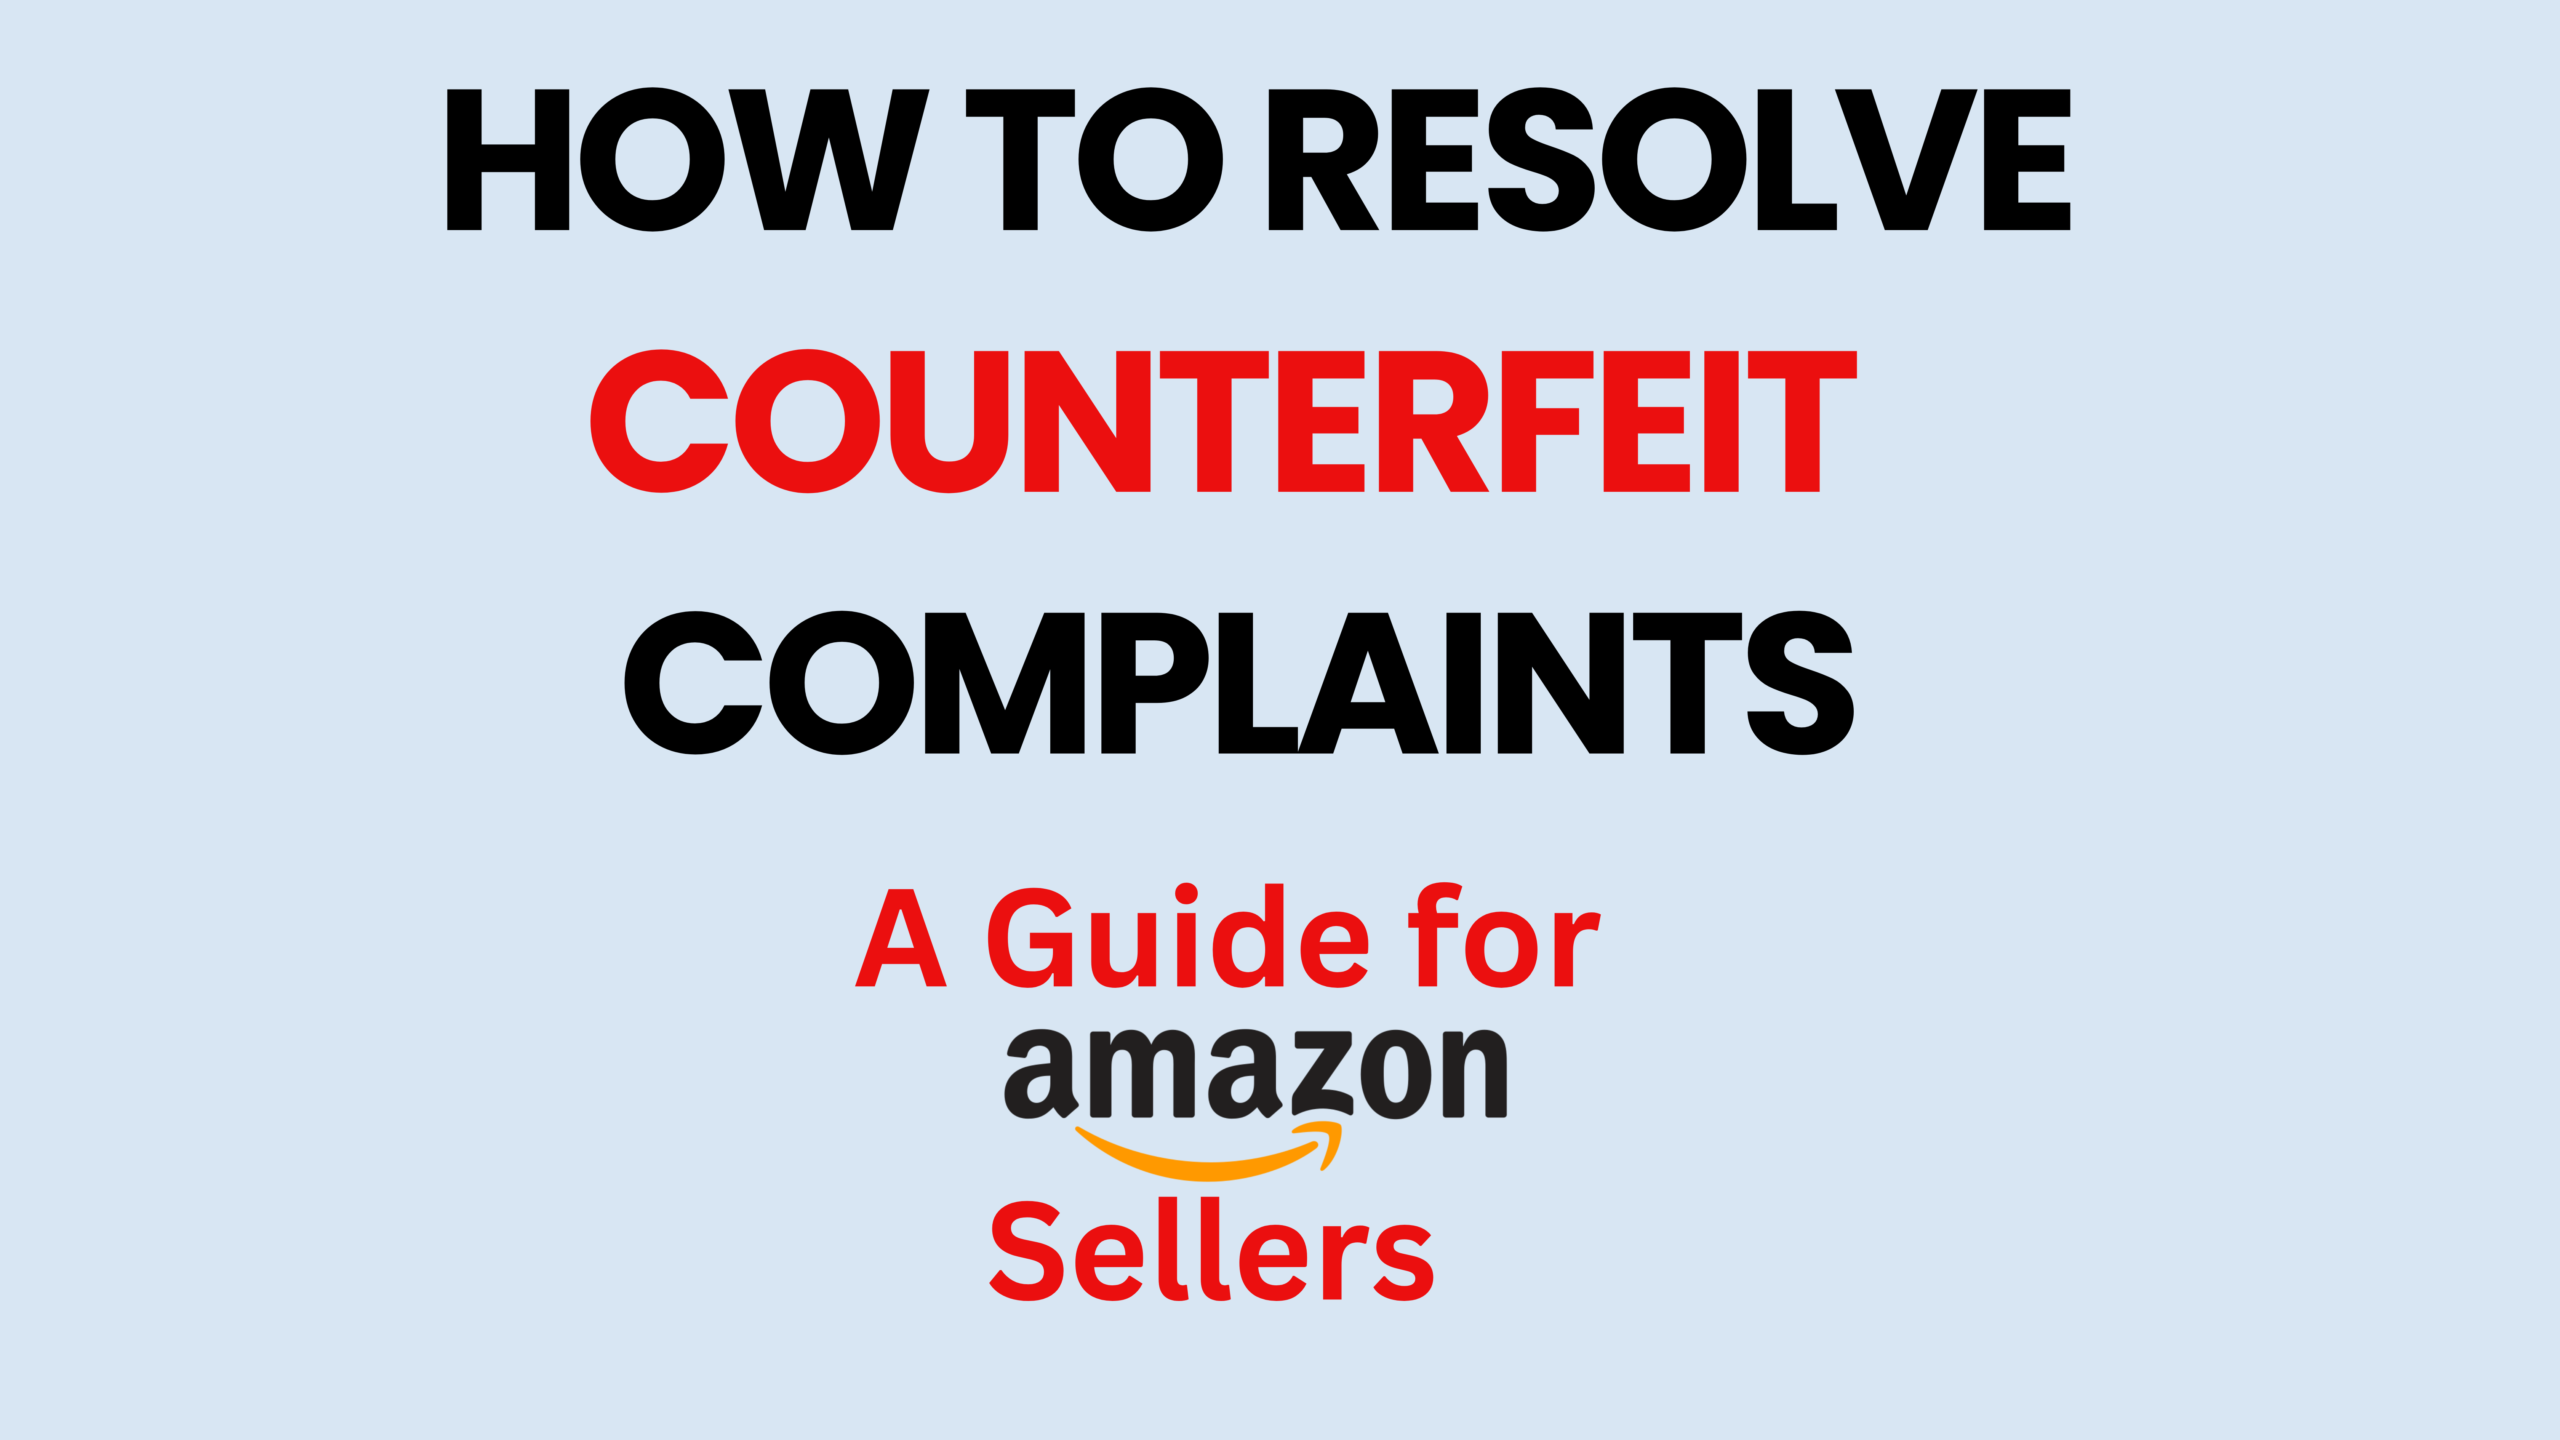 Resolving Counterfeit Complaints: A Guide to Maintaining a Healthy Amazon Seller Account